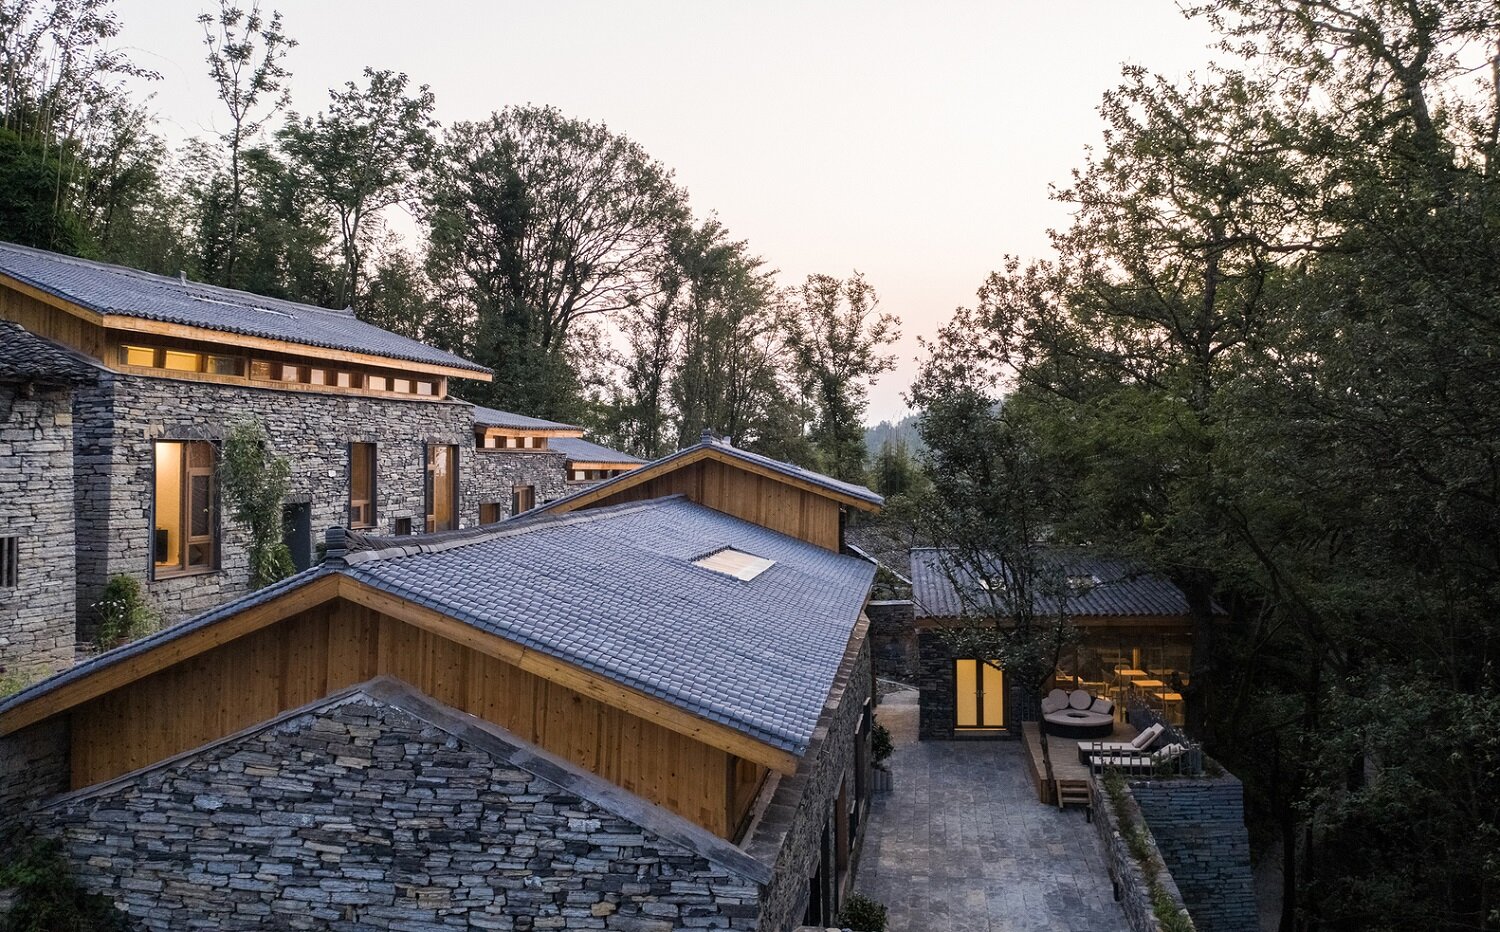 Architectural appearance design of the guest rooms of lahao stone house in Fenghuang ancient city of Hunan Province